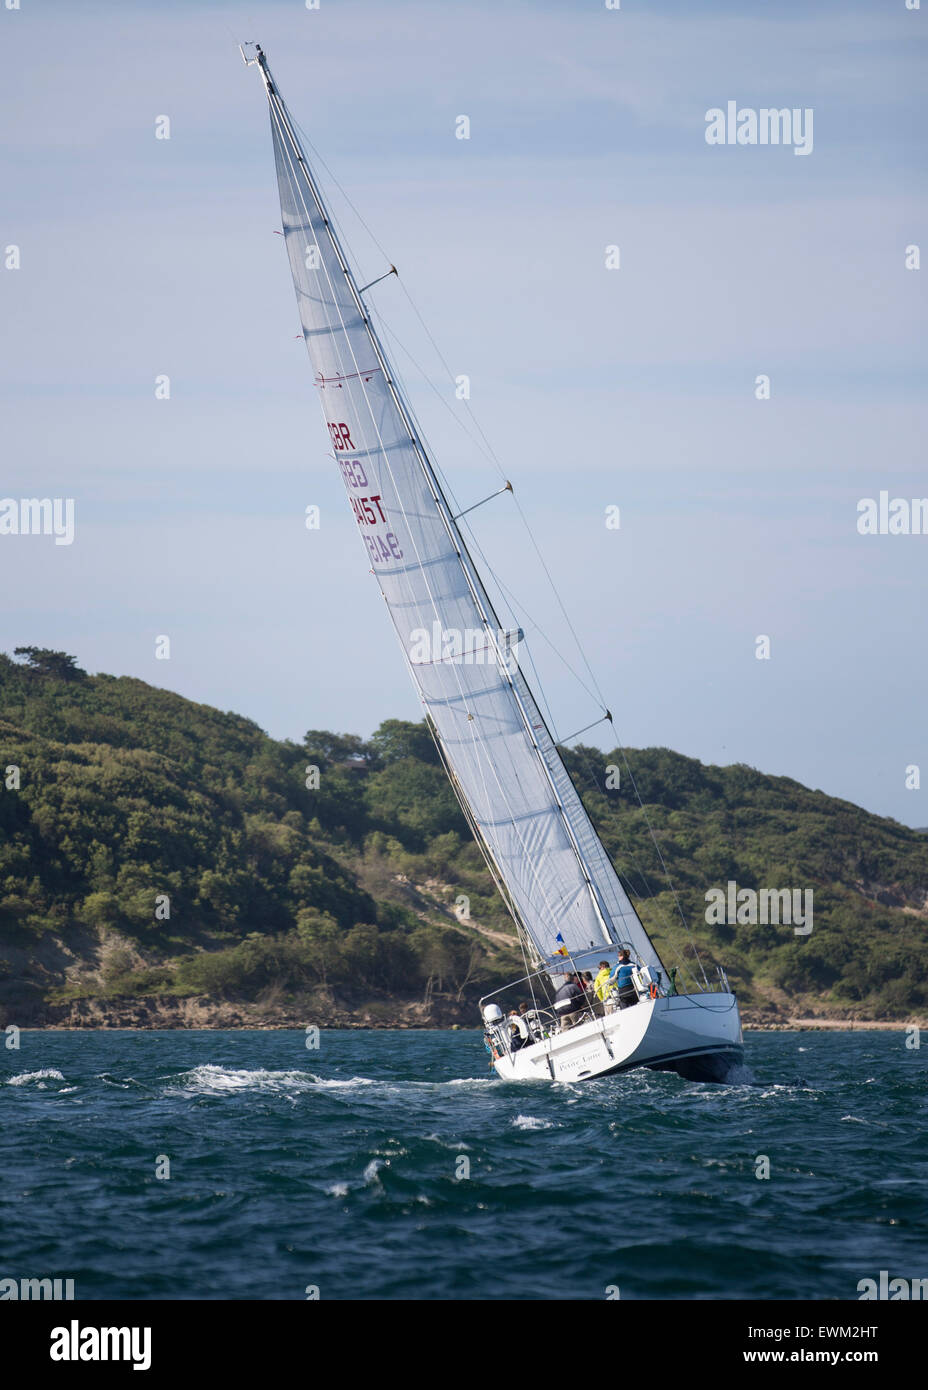 UK. 27th June, 2015. Grand Soleil 56 GBR 9415T 'Petitie Lune' off Yarmouth during the 2015 Round the Island Race Credit:  Niall Ferguson/Alamy Live News Stock Photo